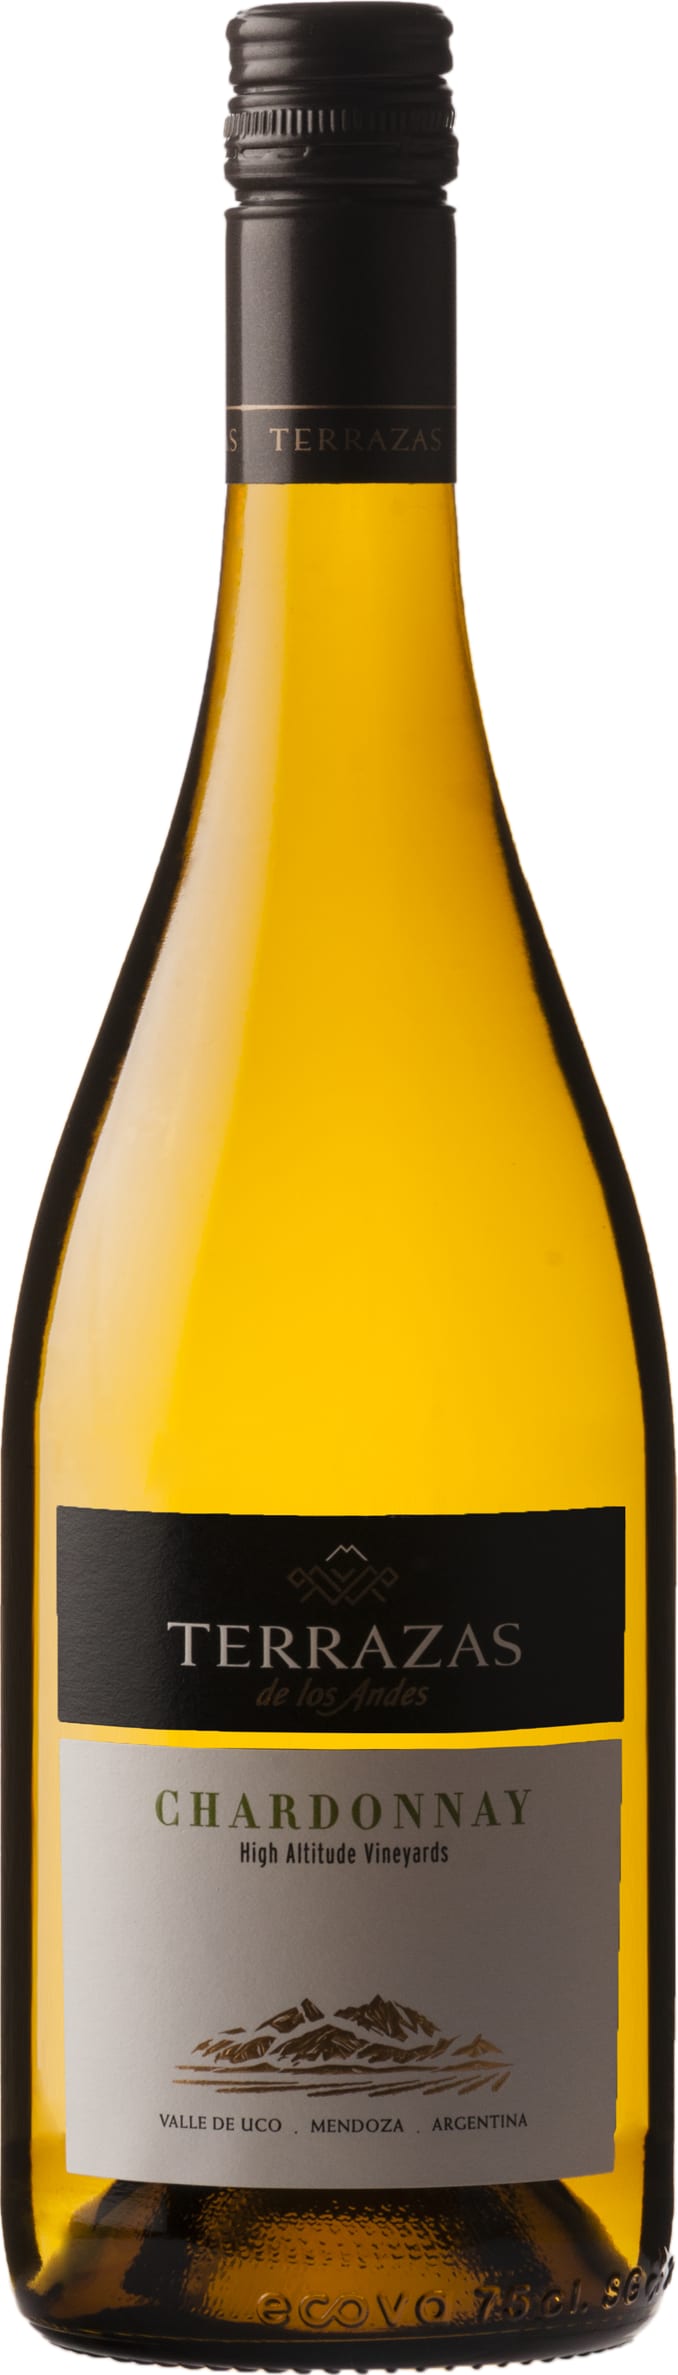 Terrazas Selection Chardonnay 2022 75cl - Buy Terrazas Wines from GREAT WINES DIRECT wine shop